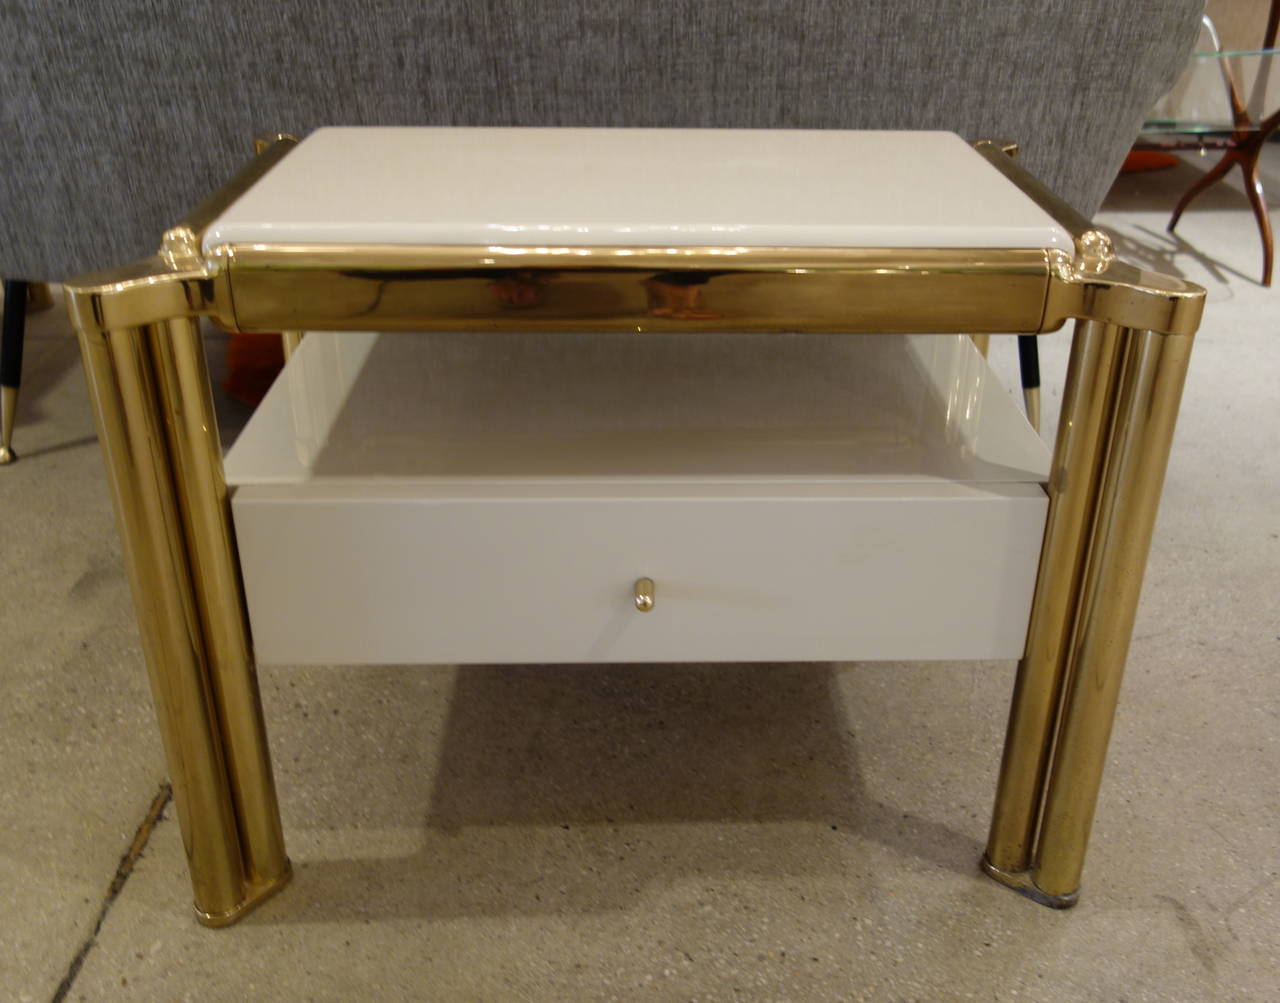 A pair of Italian Mid-Century cream colored lacquered night stands within a substantial tubular brass frame finished on all four sides featuring a floating top over a recessed space with a single brass knobbed pull-out drawer. A companion